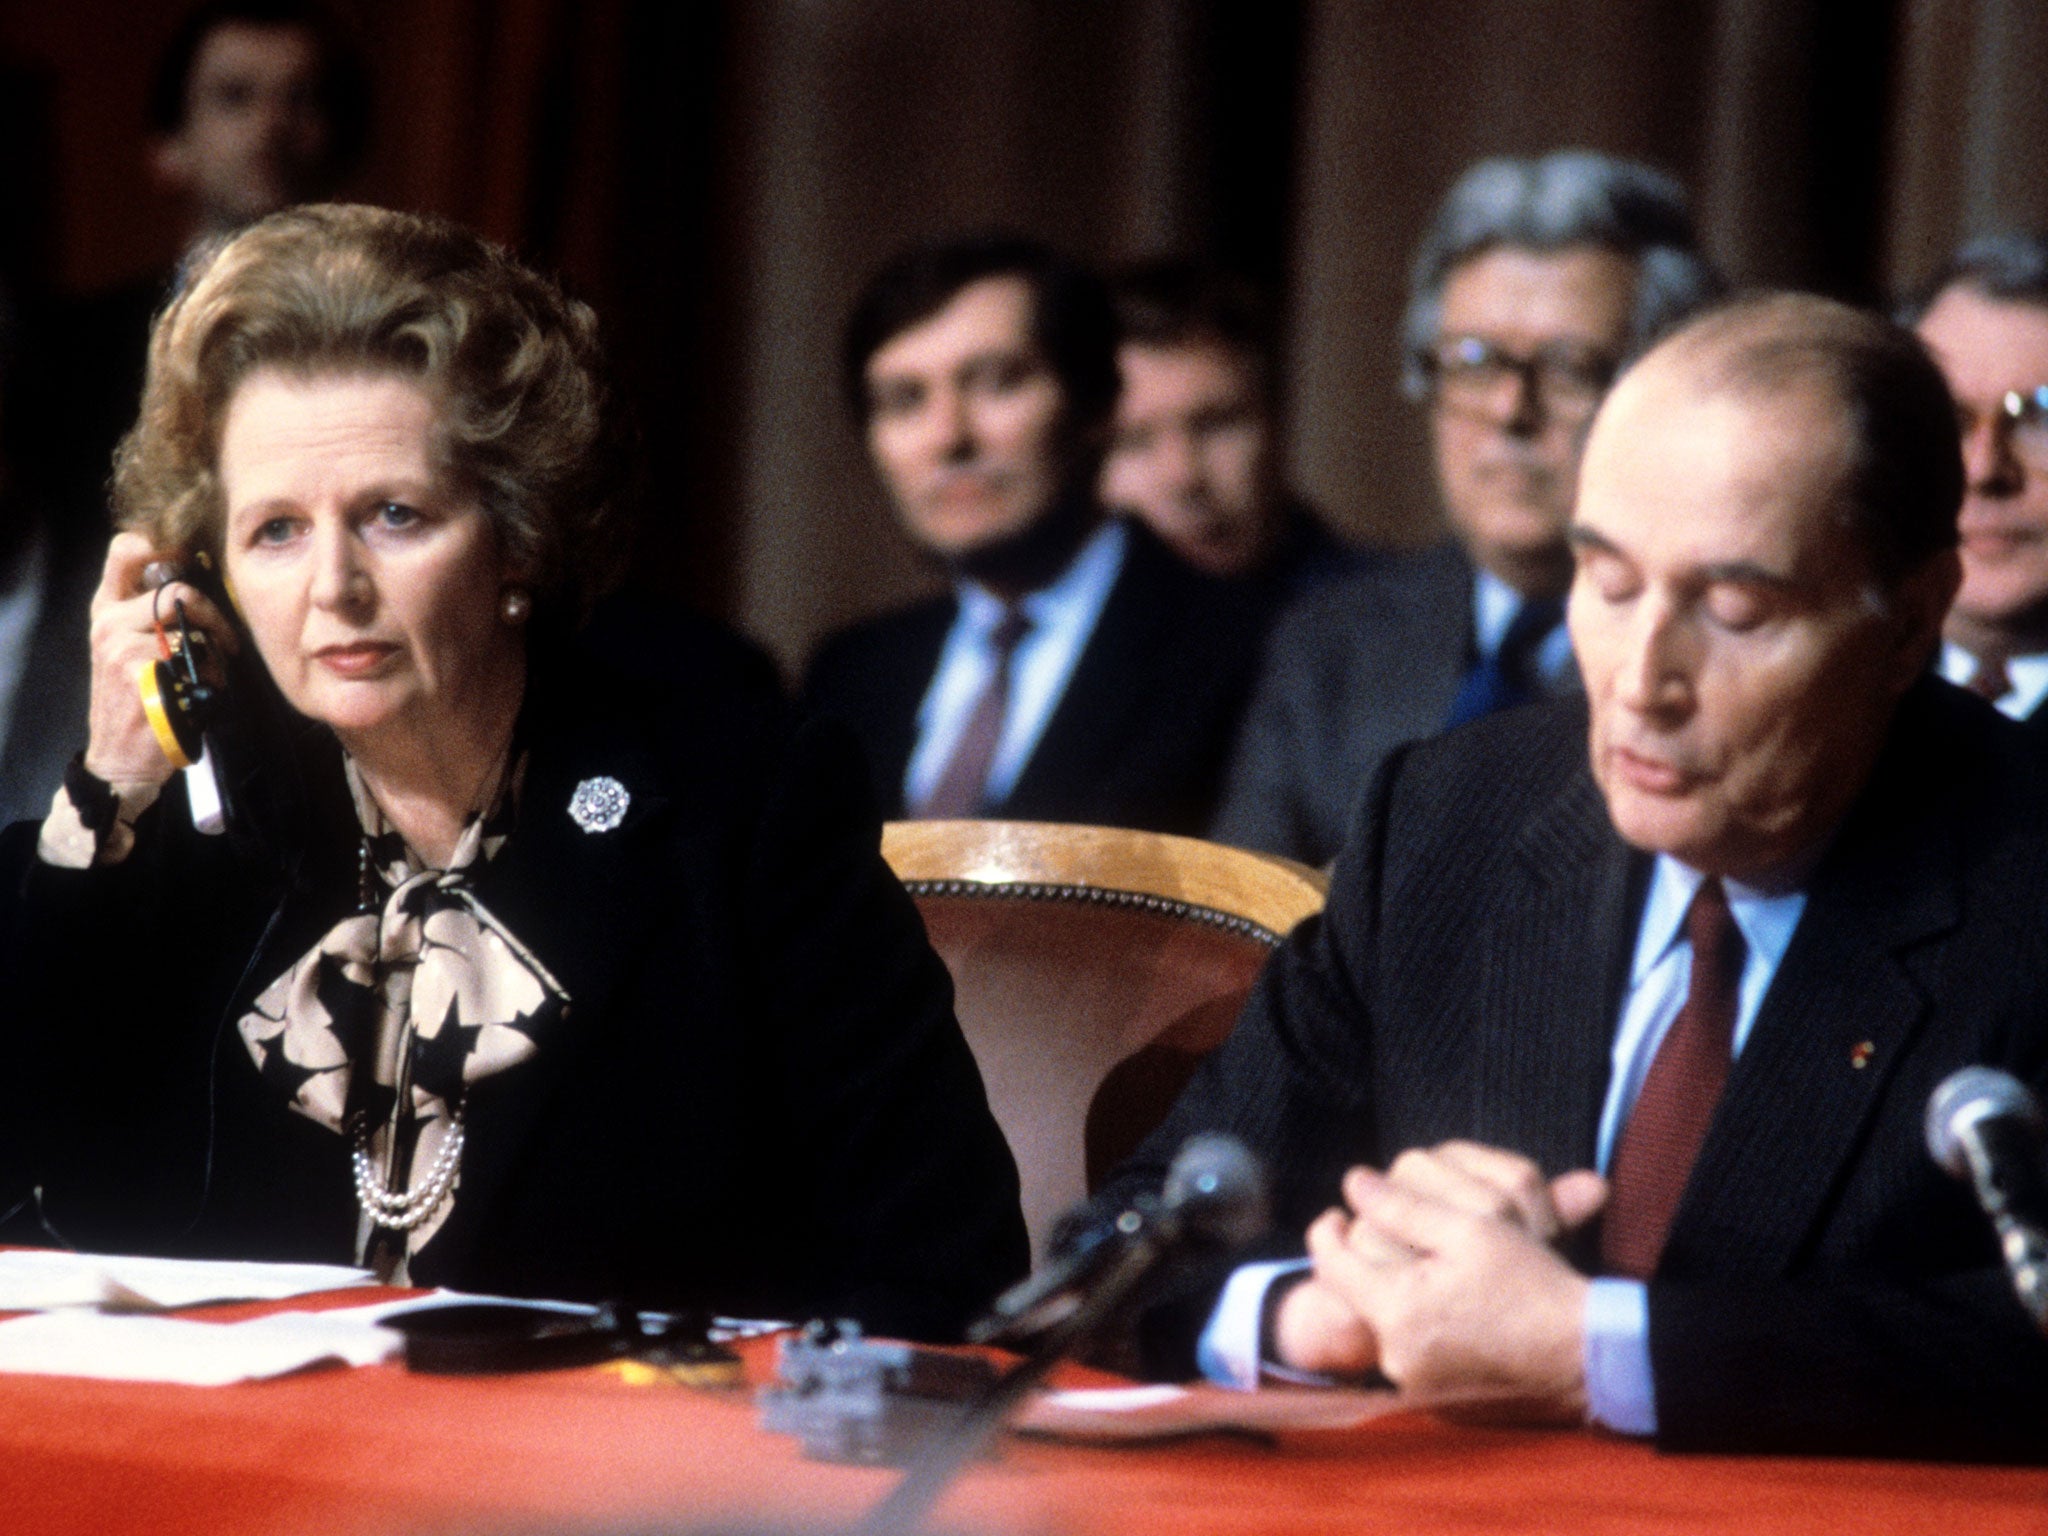 Margaret Thatcher in the 1980s with François Mitterrand